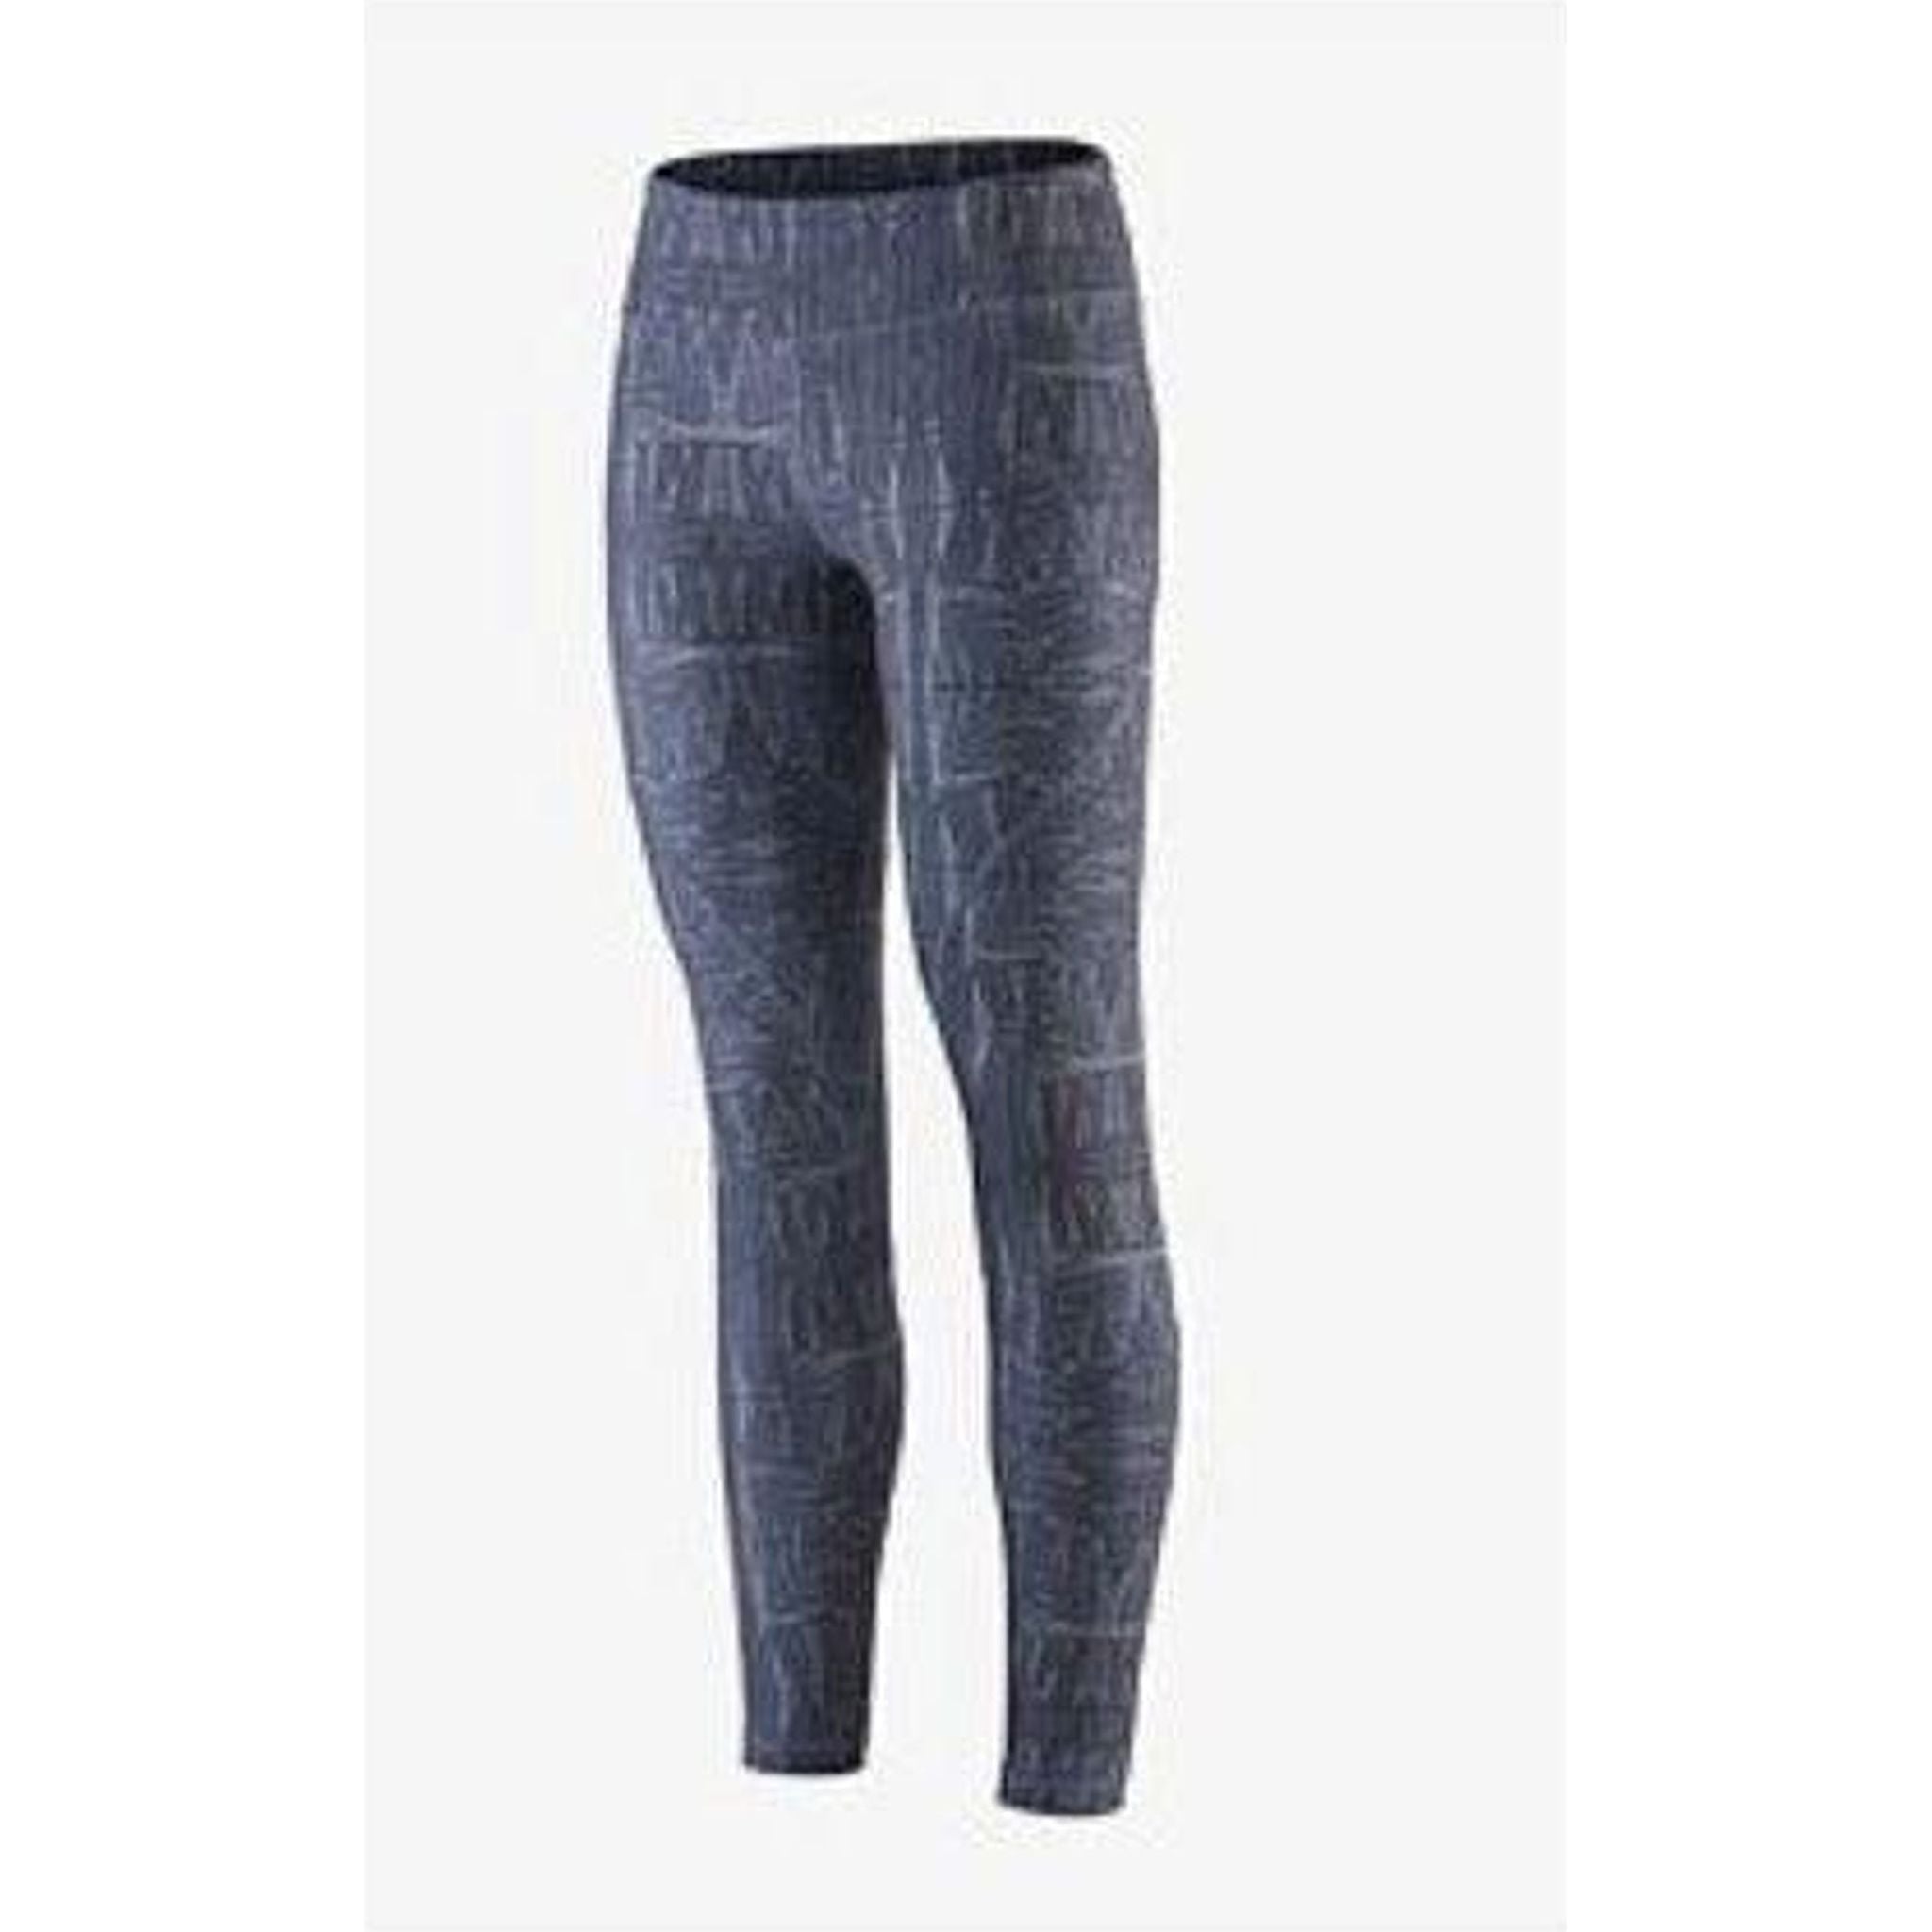 Patagonia Women's Centred Tights – Outside Sports